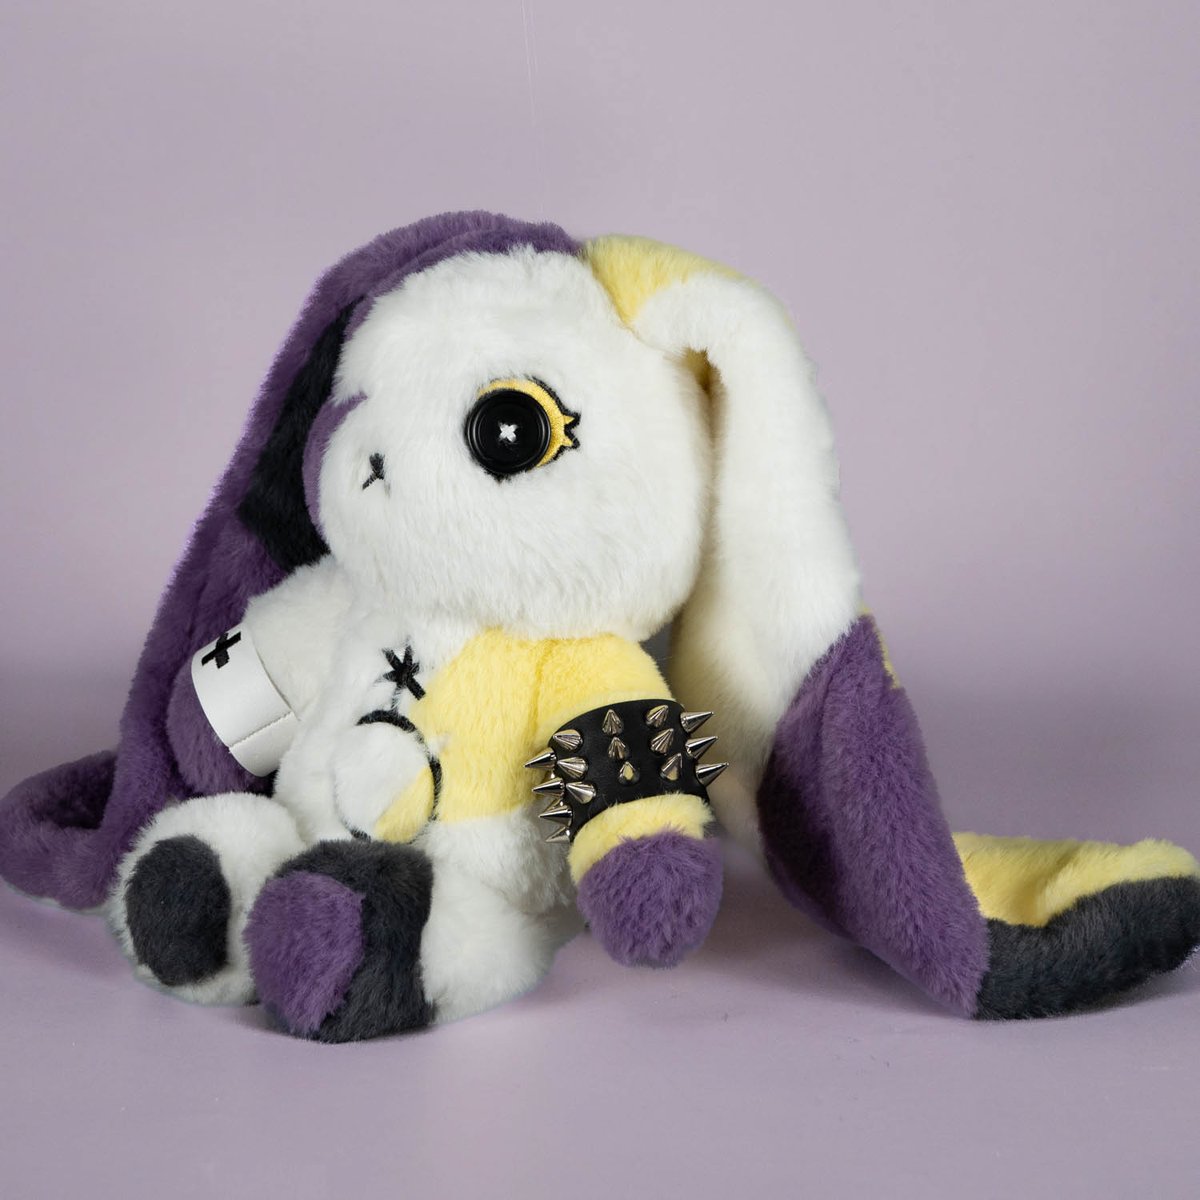 Non-Bunnary Bun launches soon! Are you ready? Sign up now as we are almost already full up for sign ups and expect this one to sell fairly quickly. mysterious.americanmcgee.com/products/plush… #nonbinary #enby #LGBTQIA #PrideMonth